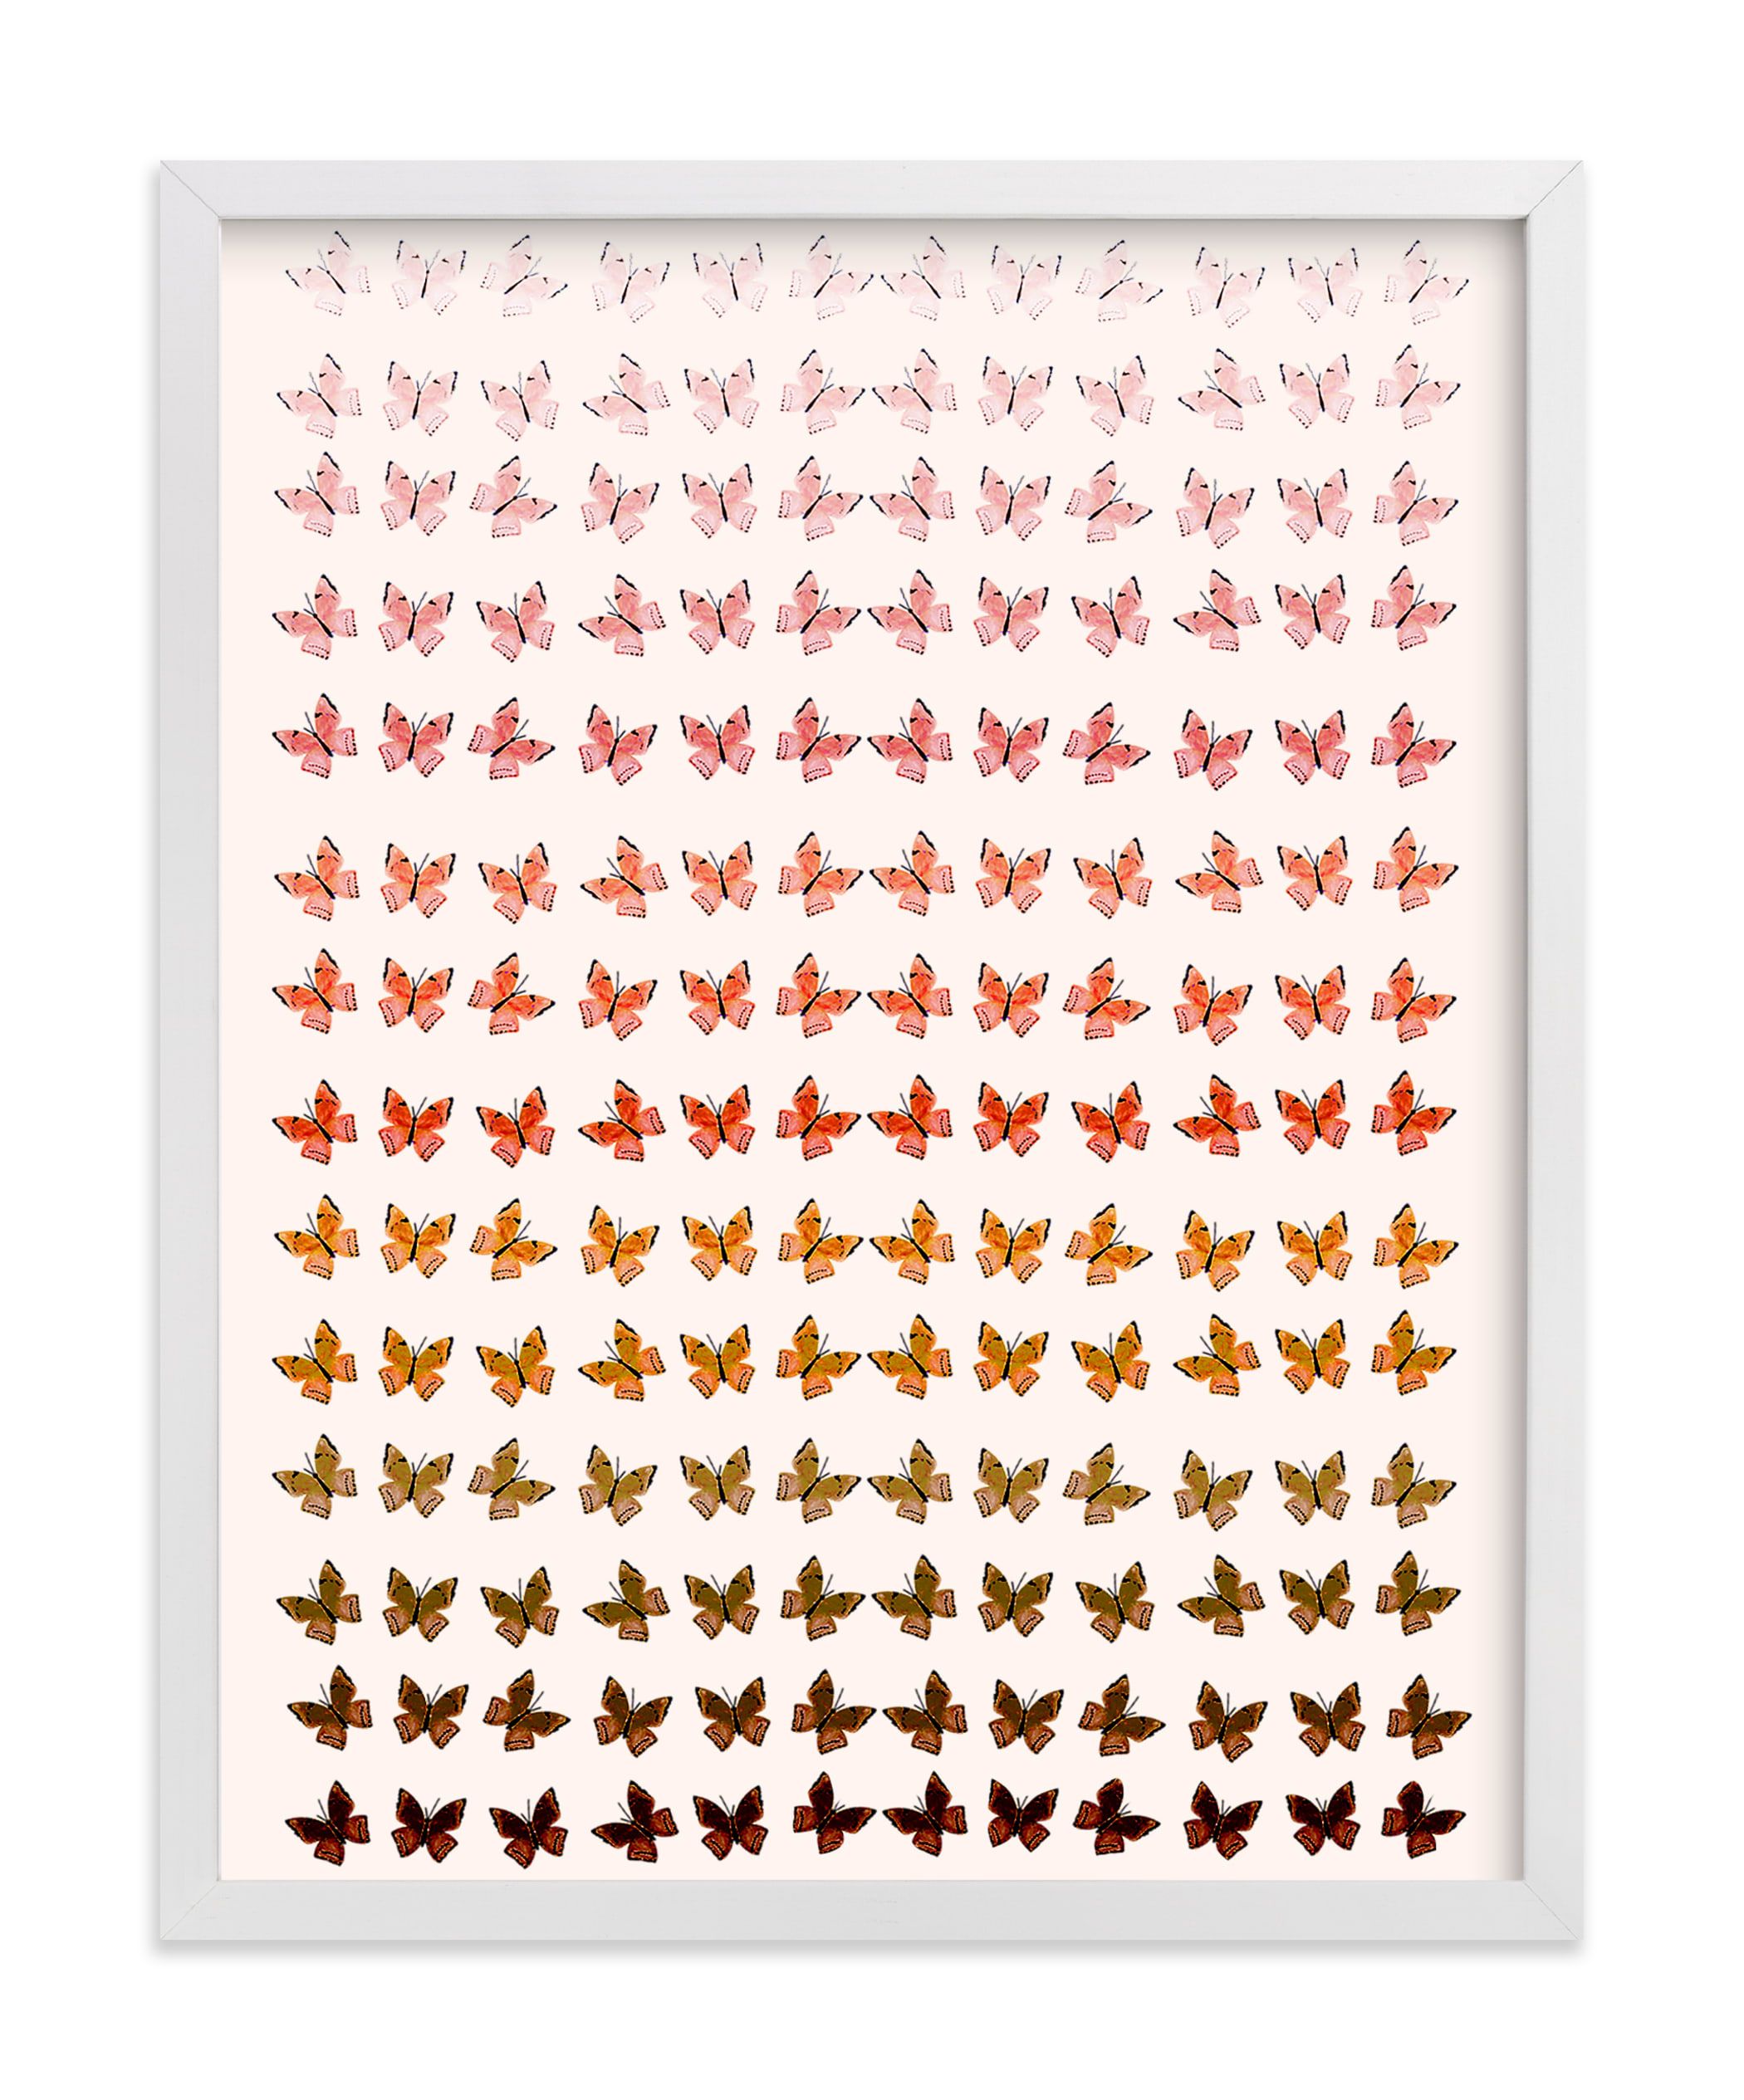 "Ombre Butterflies" - Painting Limited Edition Art Print by Shannon Kirsten. | Minted